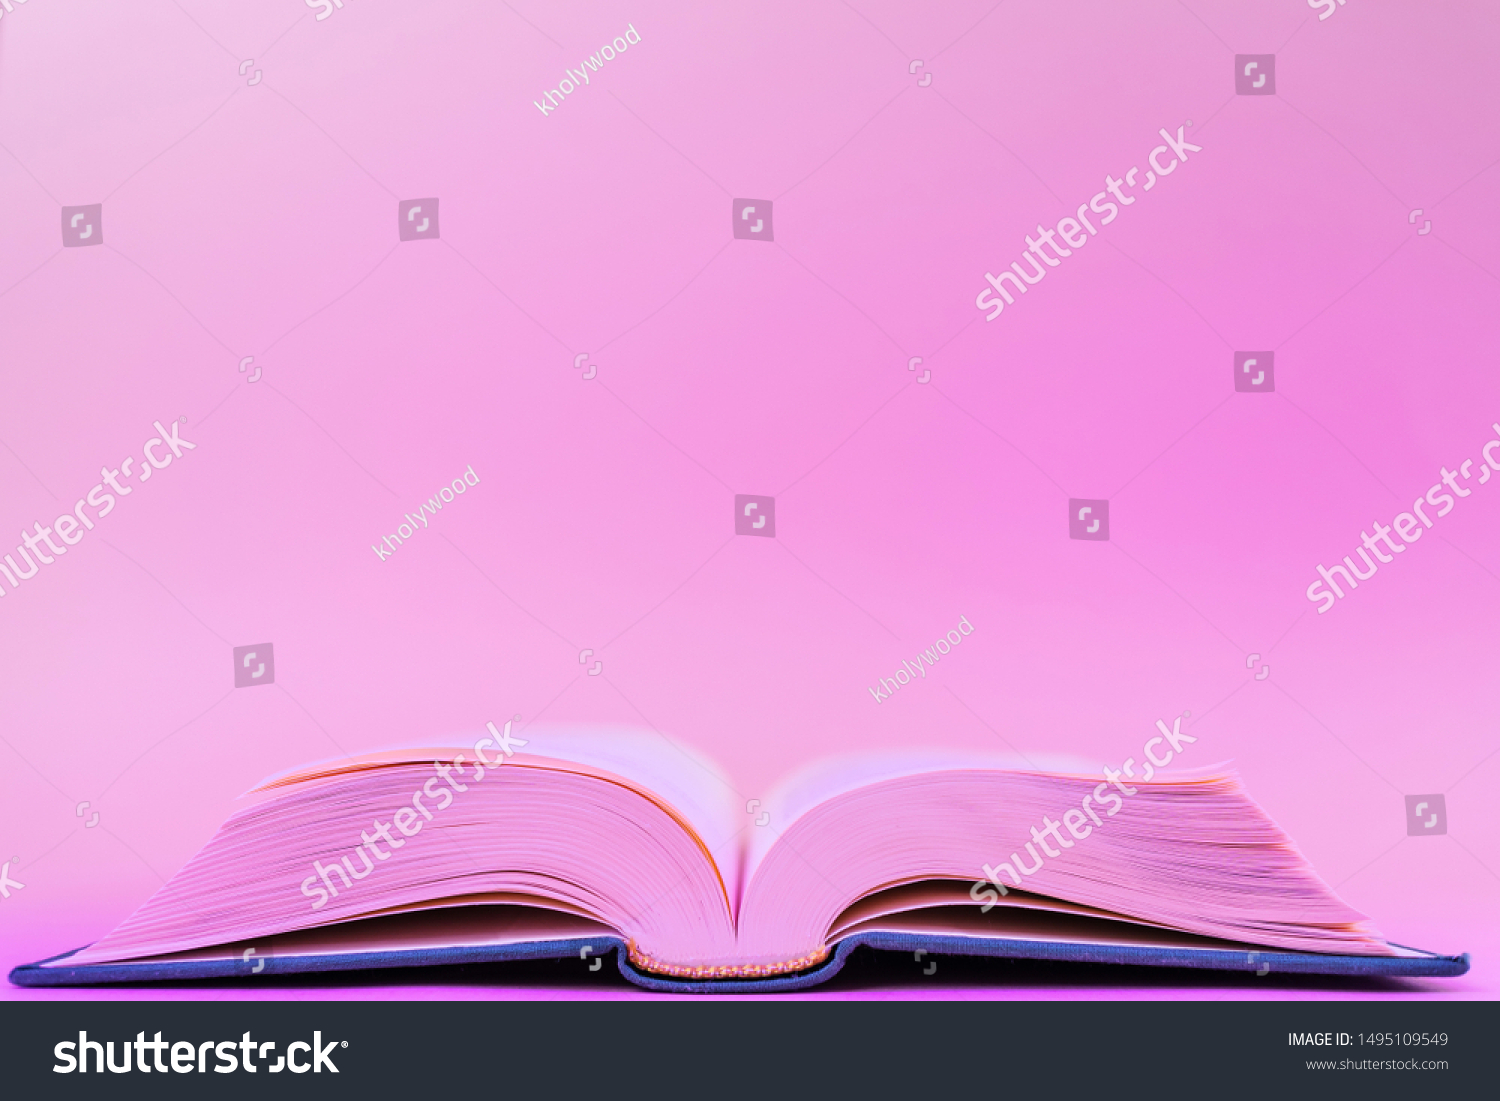 Close-up book on a pastel pink background in a trendy neon color light. The concept of reading, book novelties, book business, literature. Minimalism, place for text. #1495109549